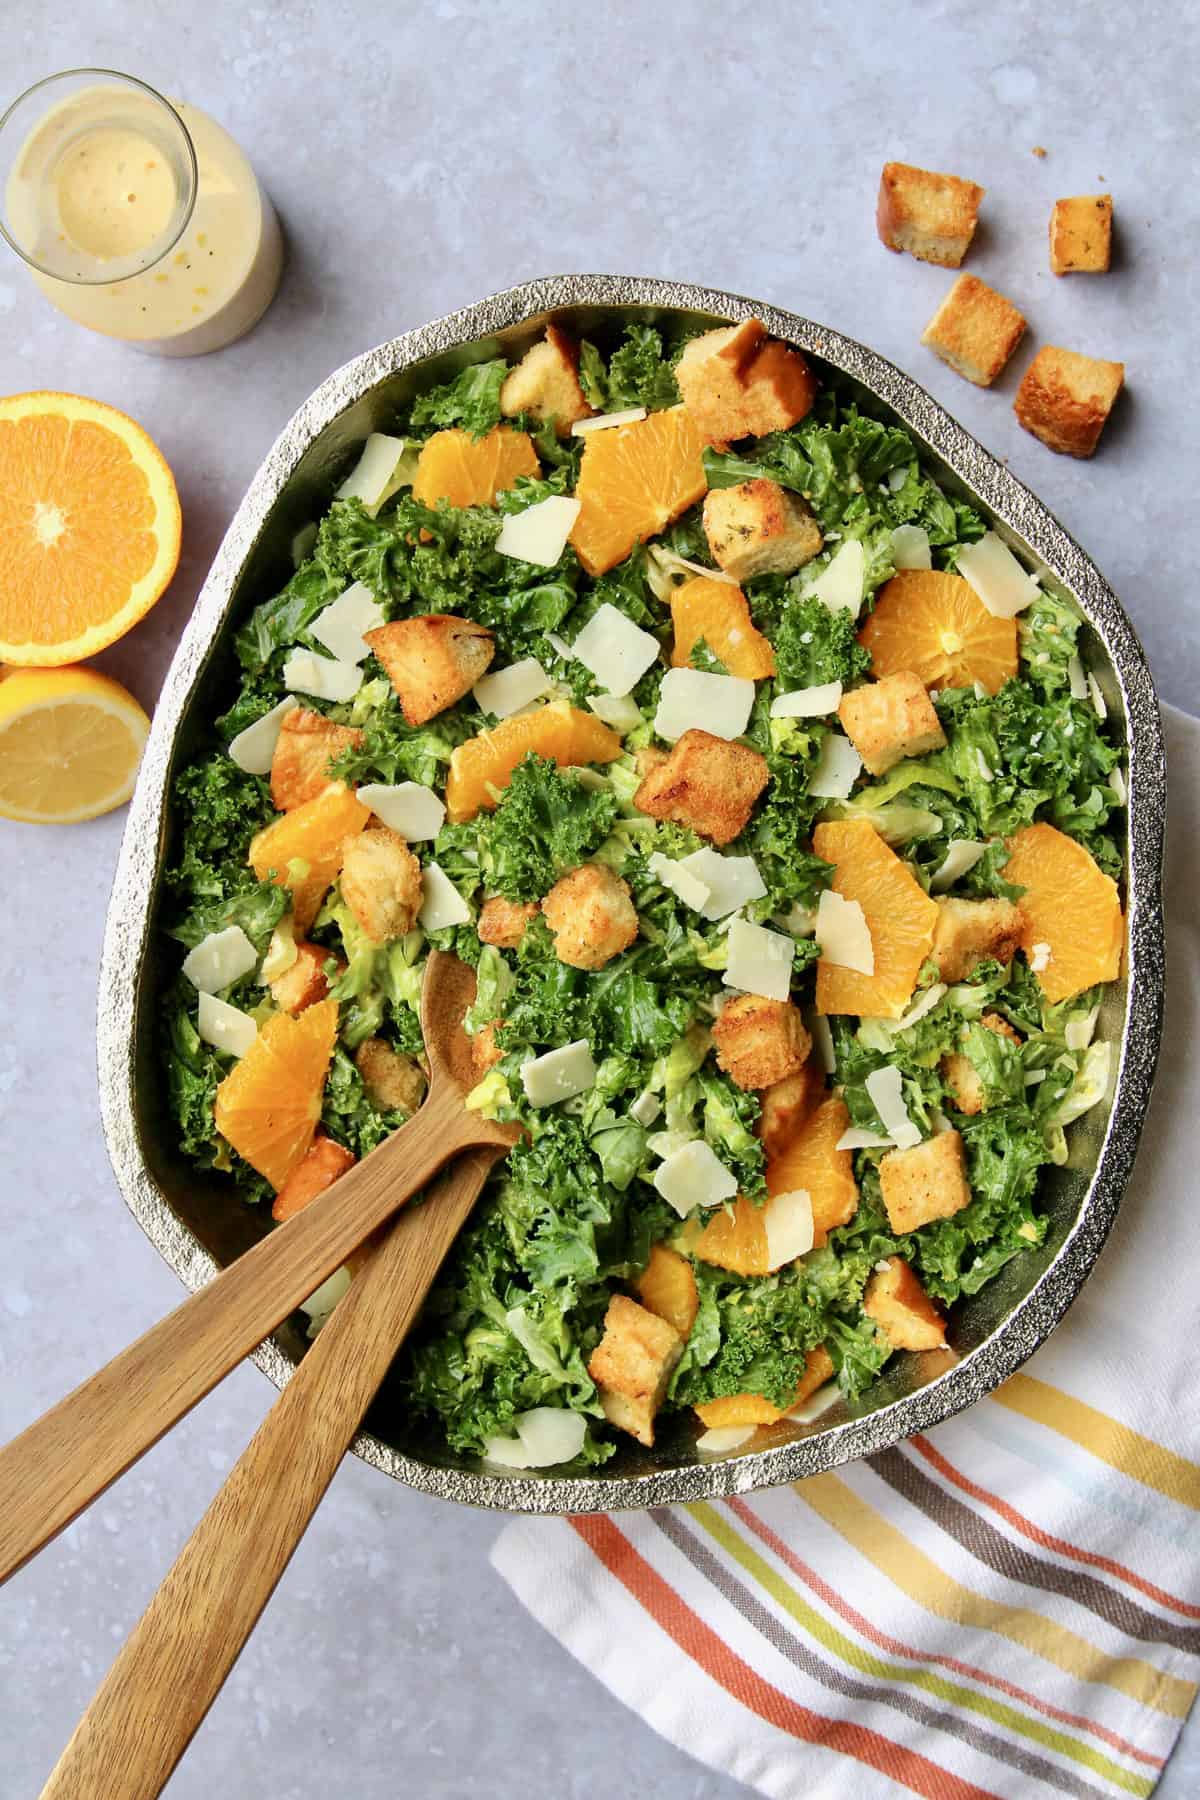 Citrus Caesar Salad with Baked Croutons